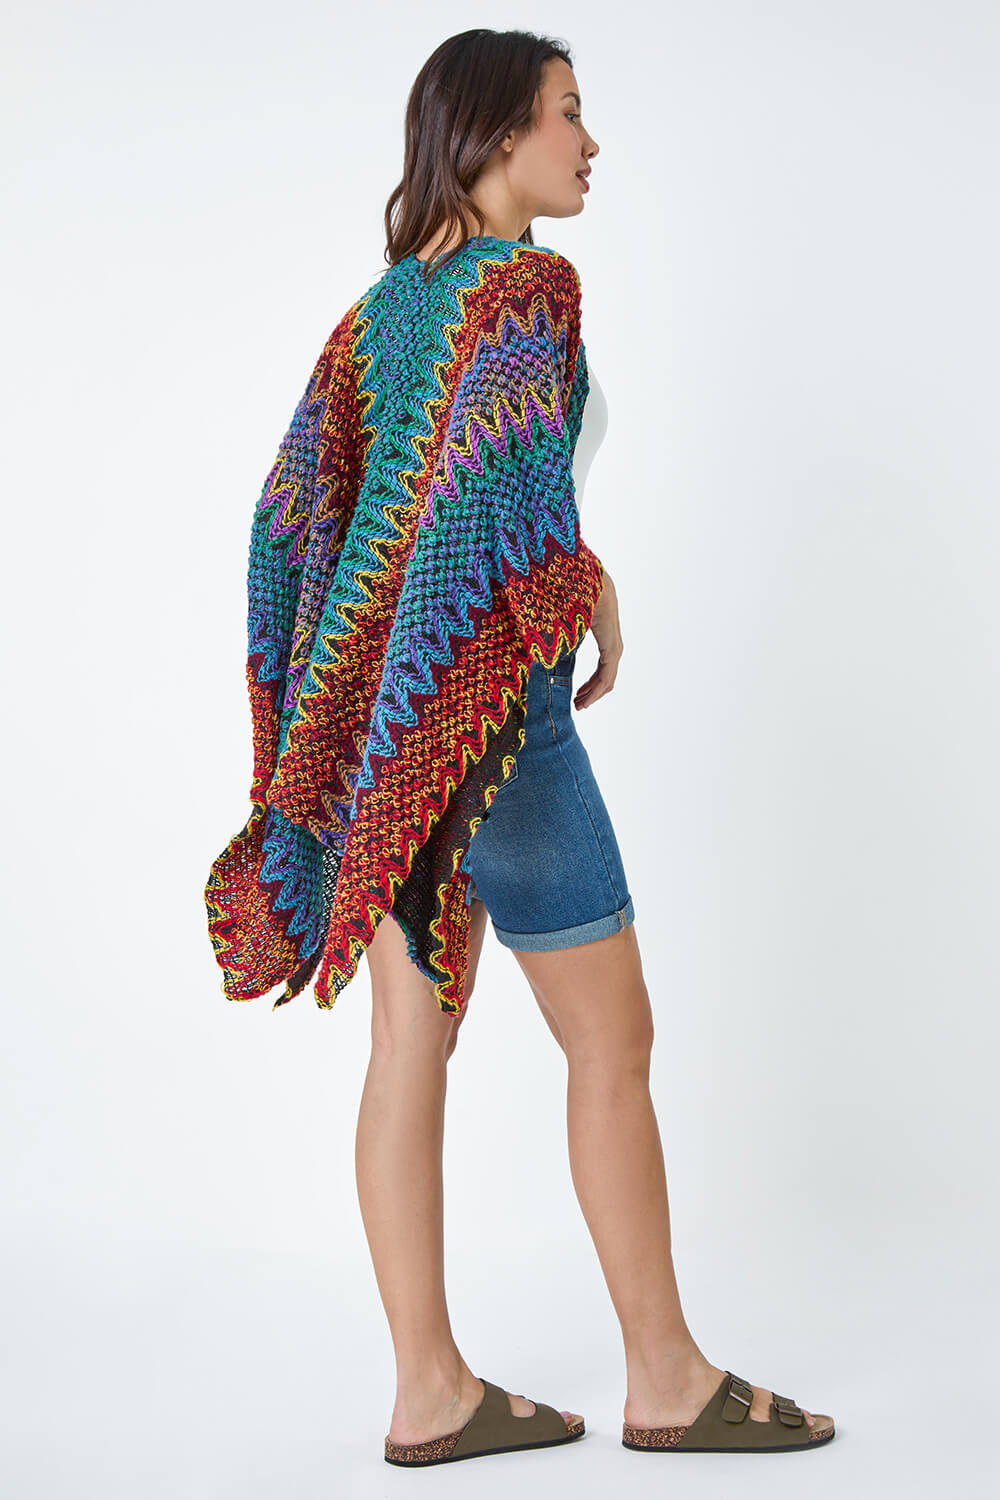 Turquoise One Size Textured Aztec Print Cape, Image 3 of 5